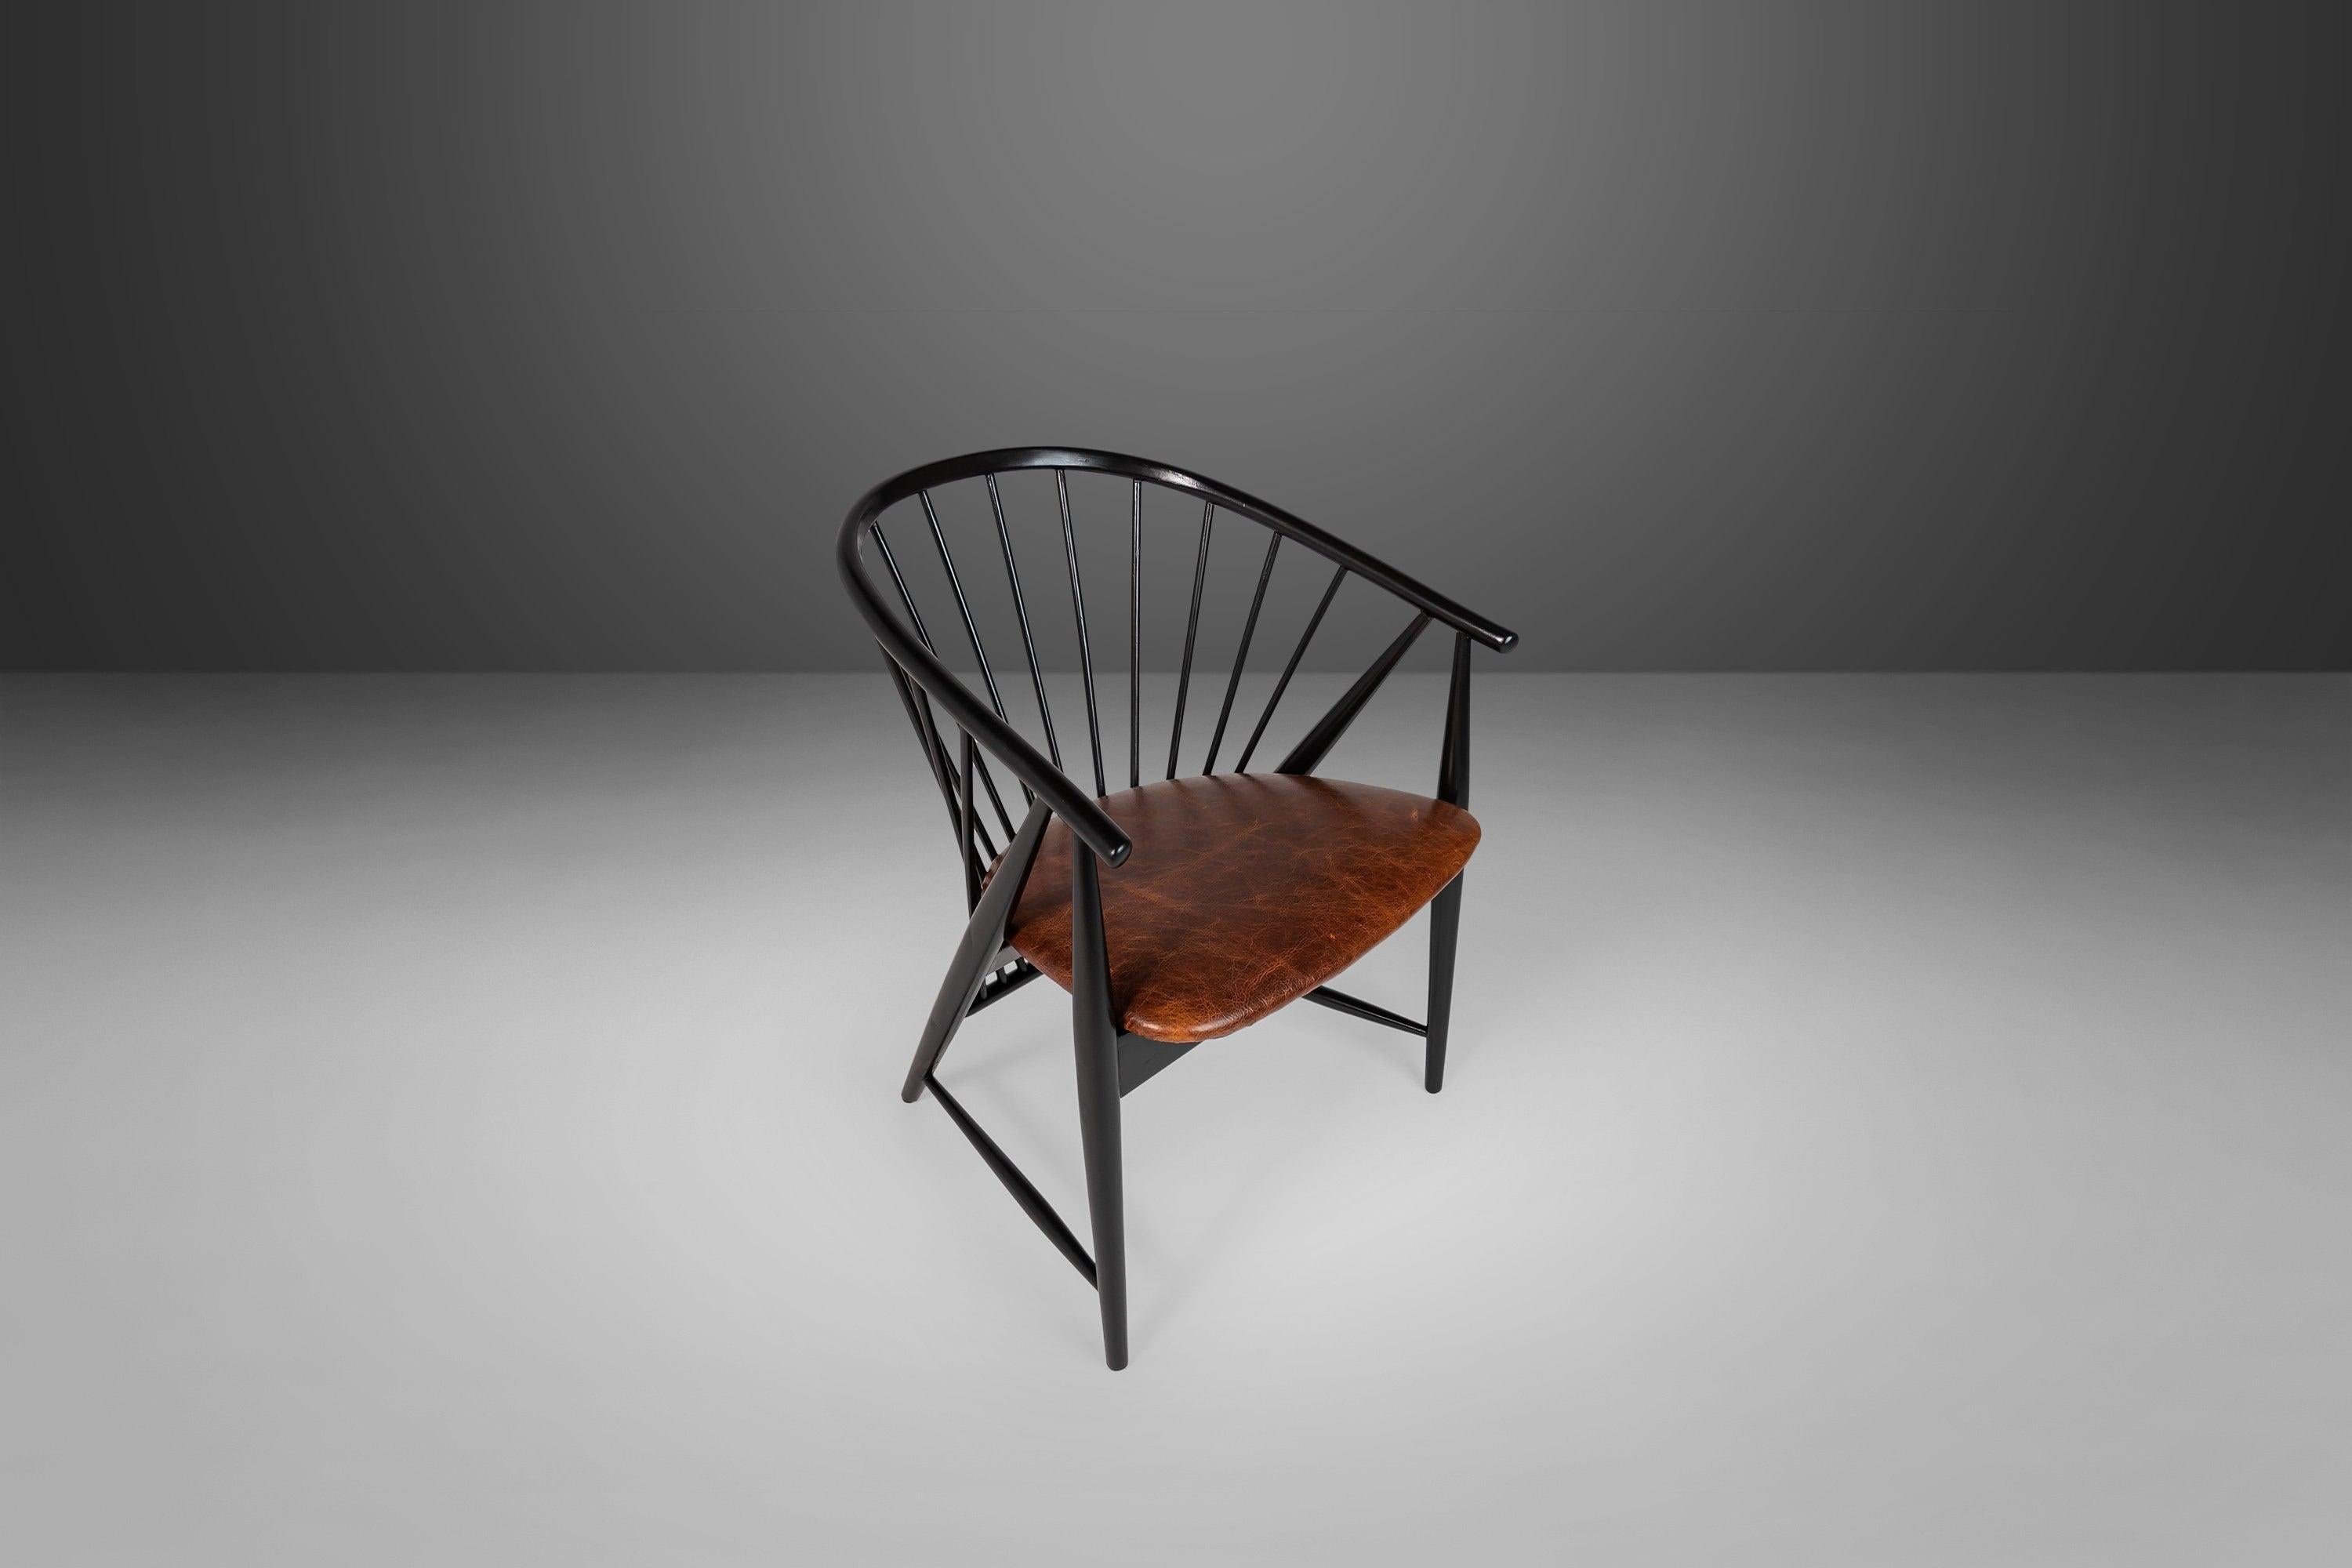 A spindle back design by Sonna Rosen of Sweden. Finished in ebonized beech wood. The seat has a distressed cognac leather seat with perfect patina.

---Dimensions---

width: 27.75 in / 70.49 cm
depth: 24 in / 60.96 cm
height: 29.5 in / 74.93